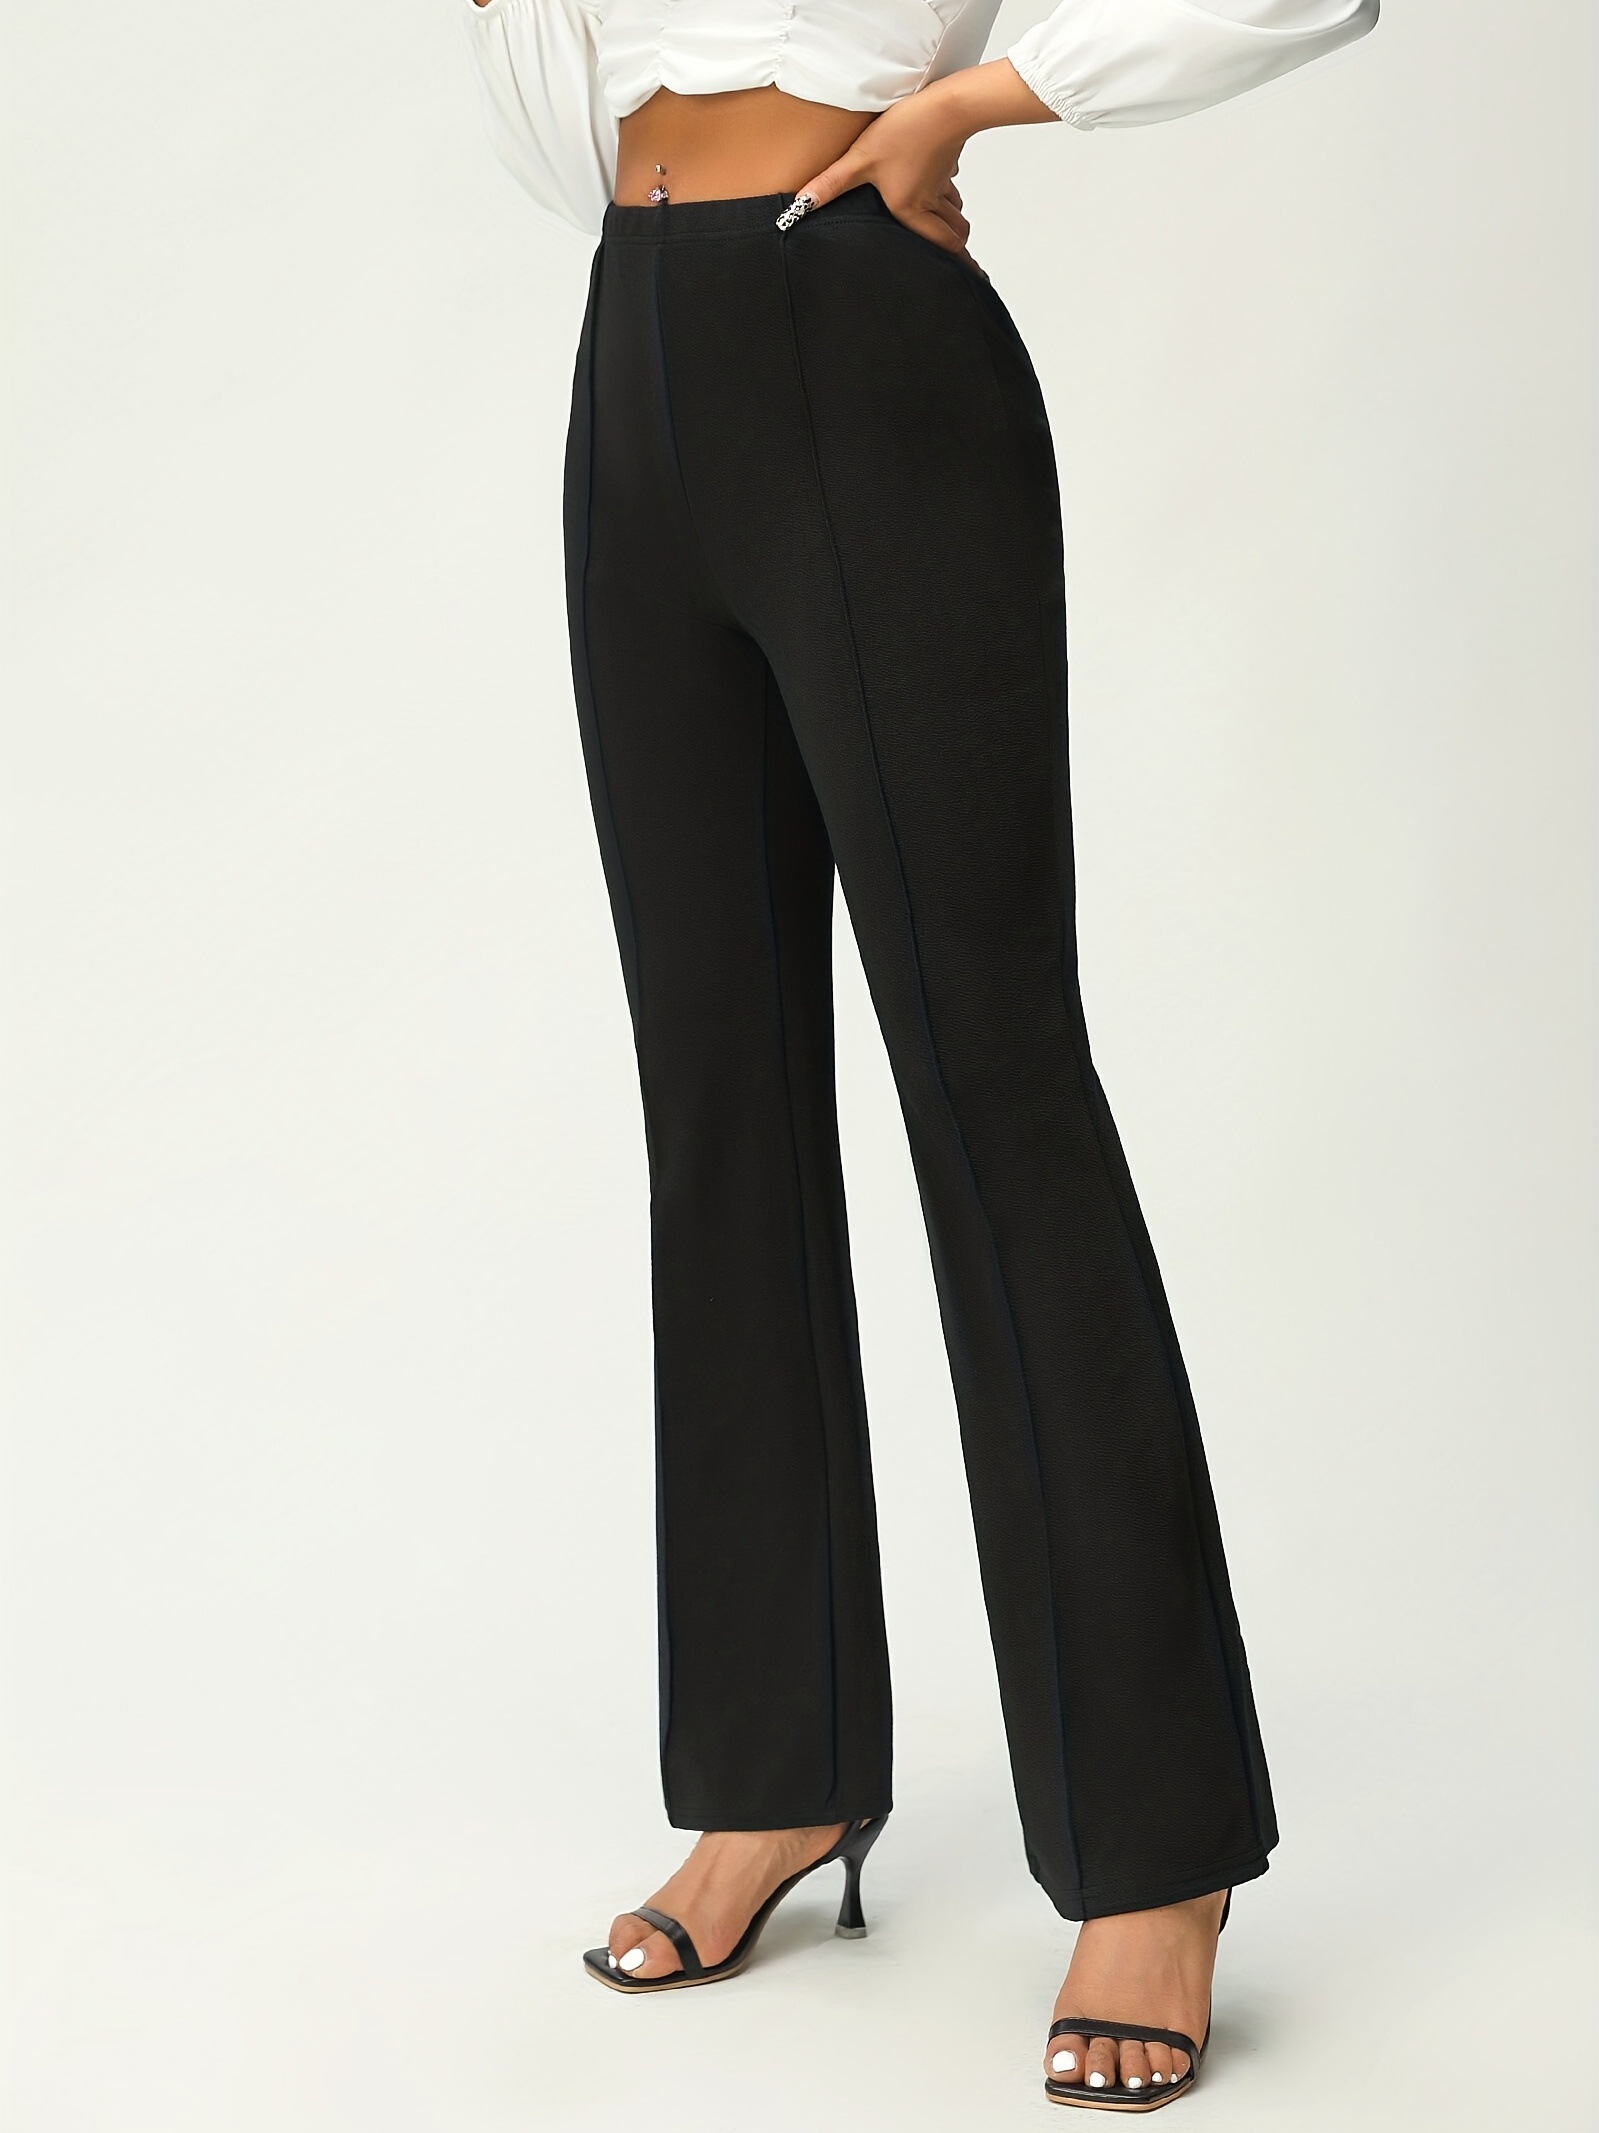 High Waisted Palazzo Flared High Waisted Dress Pants For Women